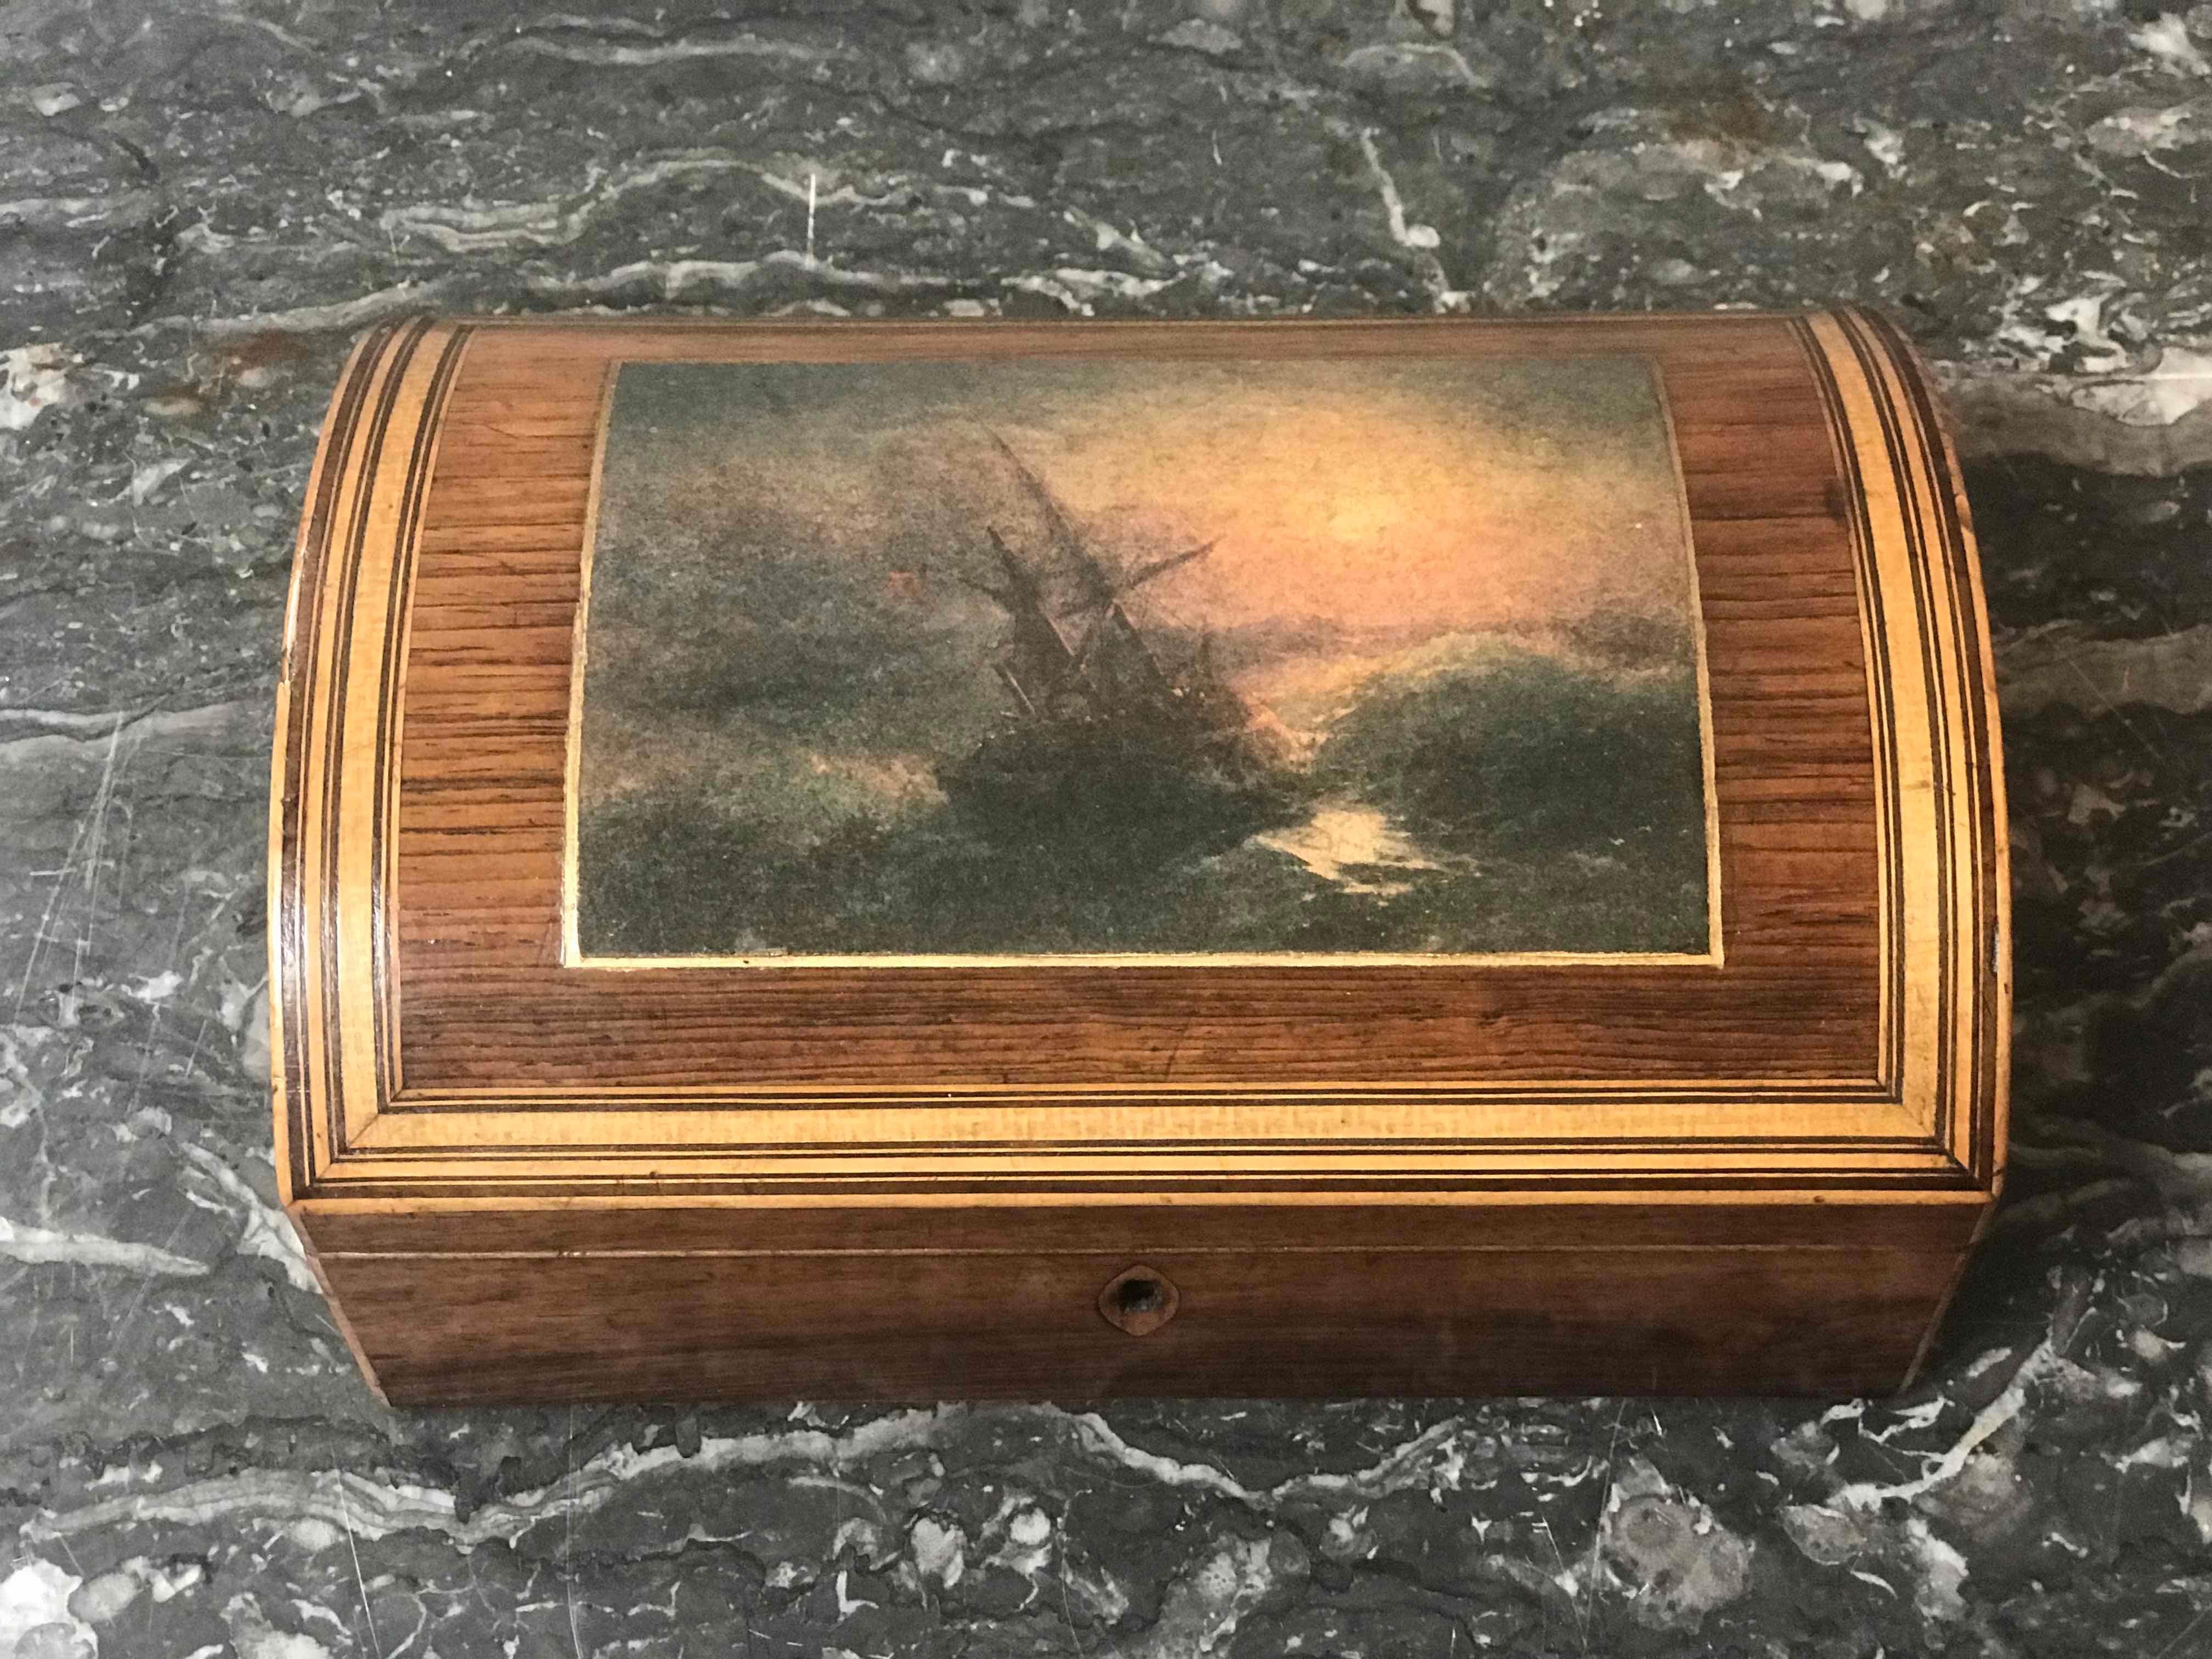 English Wooden Dome Box with Seascape Scene from 1880s England